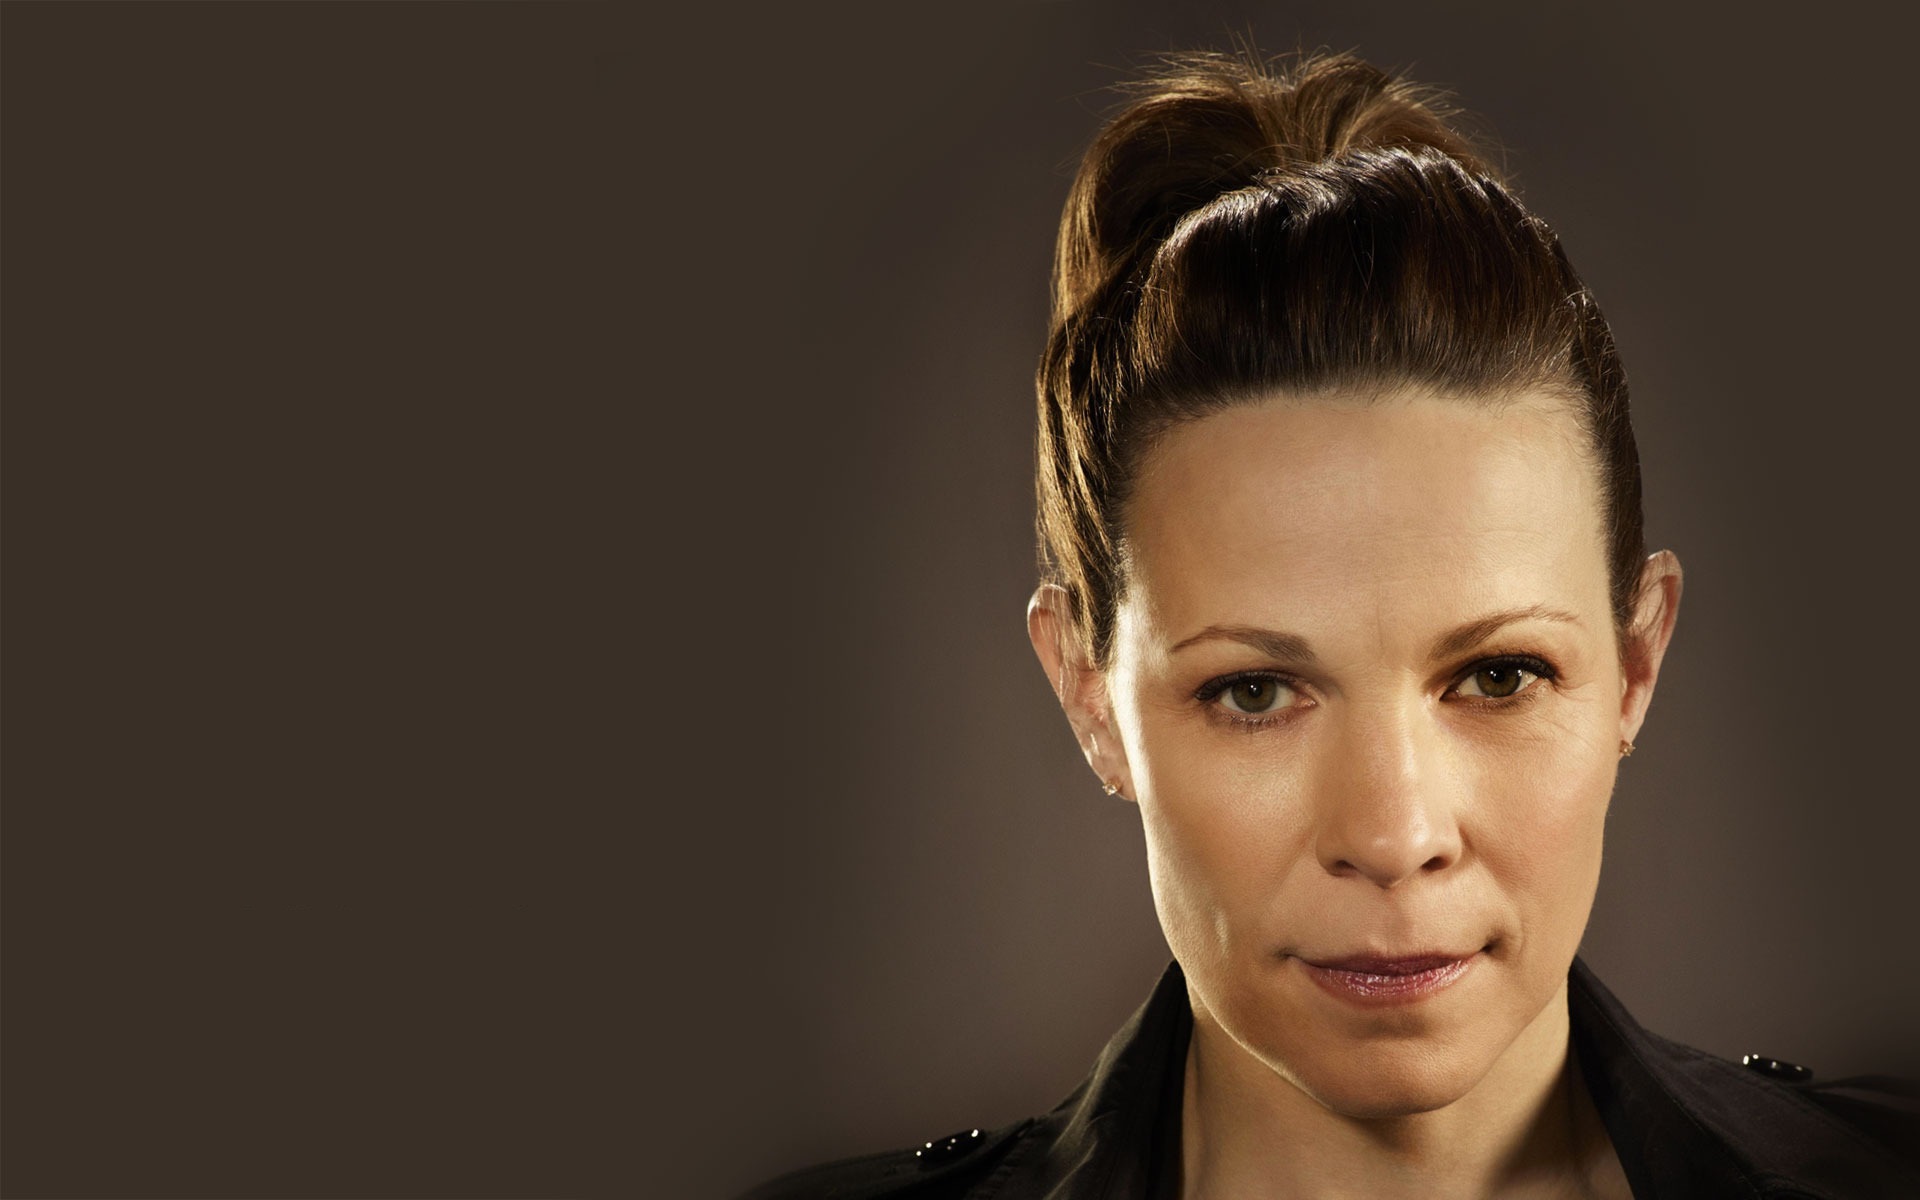 Lili Taylor Wallpapers Images Photos Pictures Backgrounds